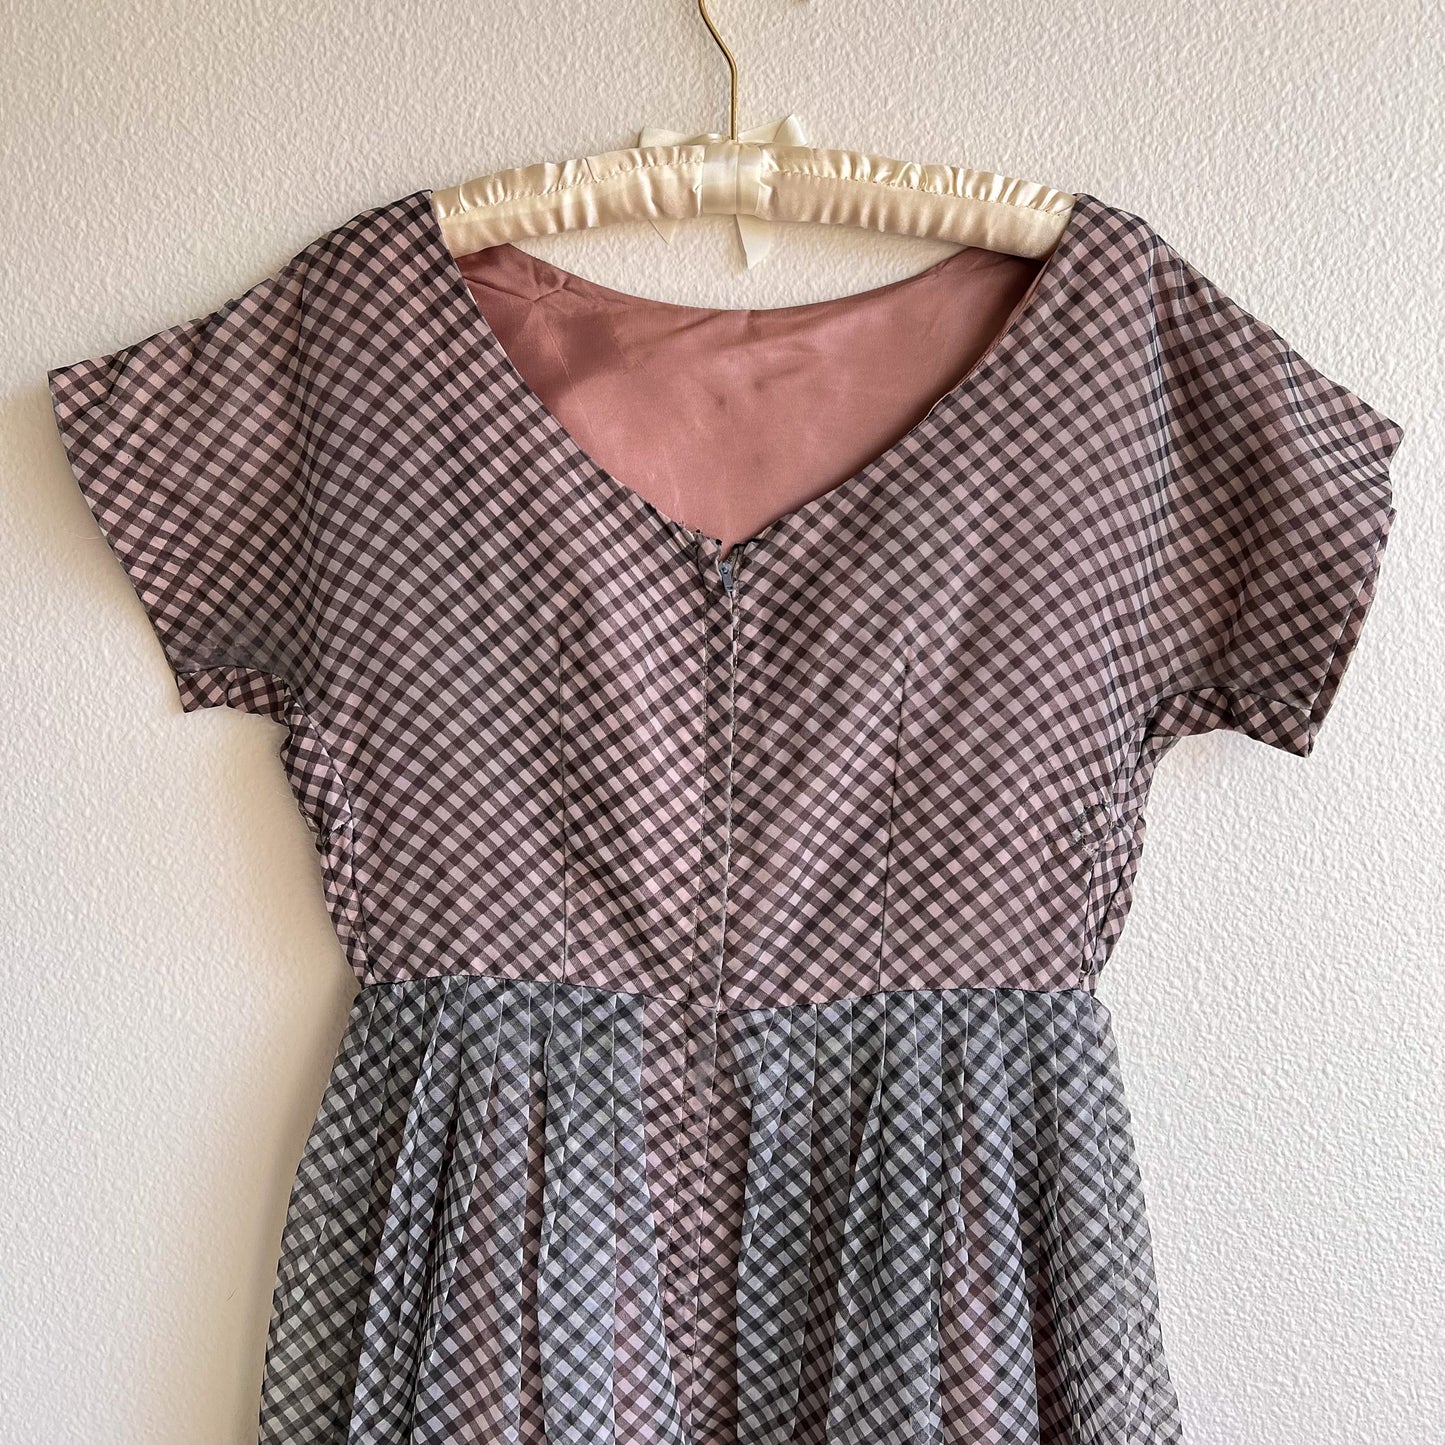 1950s Gingham Chiffon Pleated Cocktail Dress With Black Lace (M)